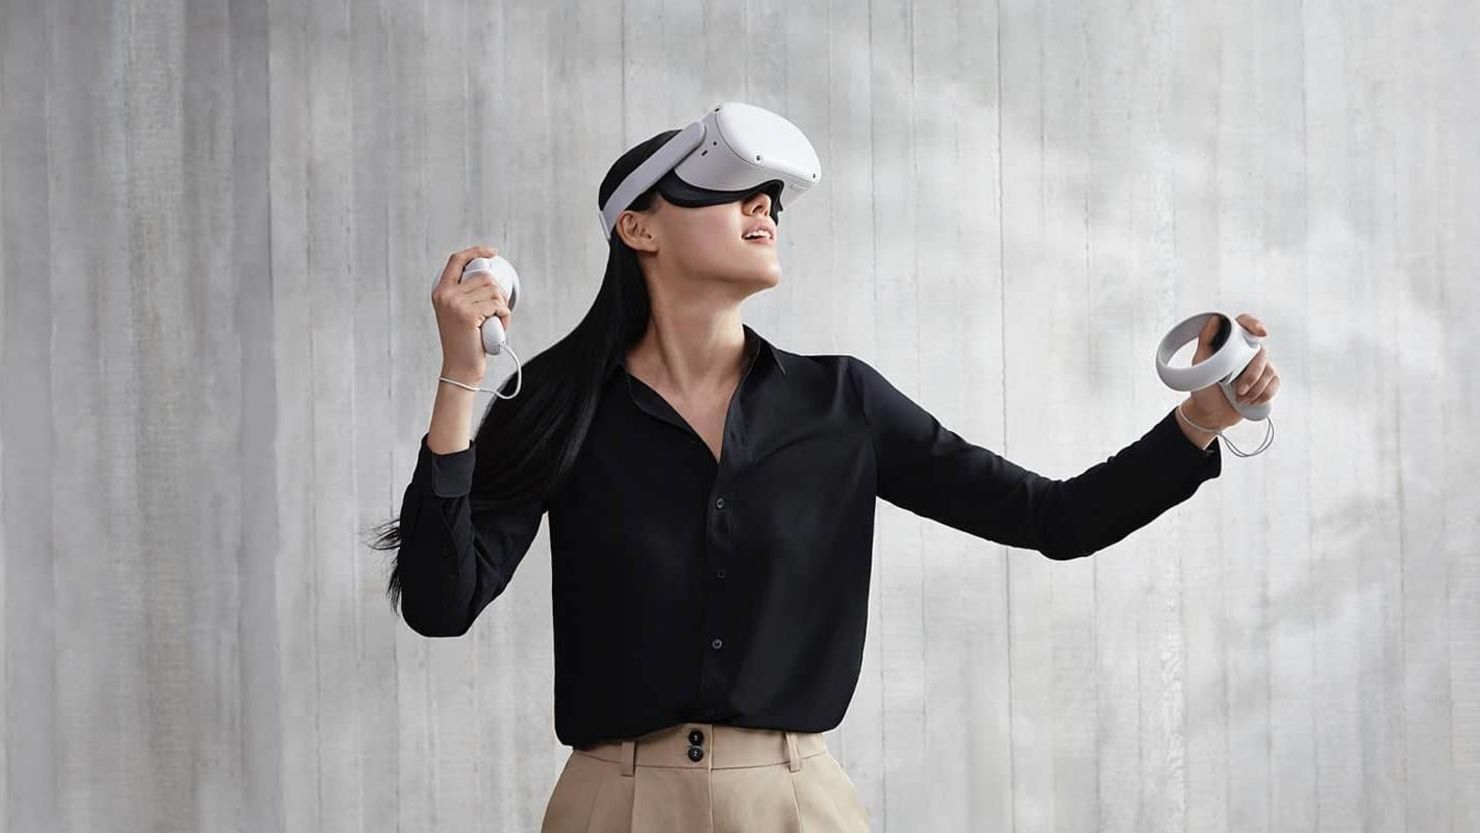 Oculus Quest 2 on sale at Walmart for $199